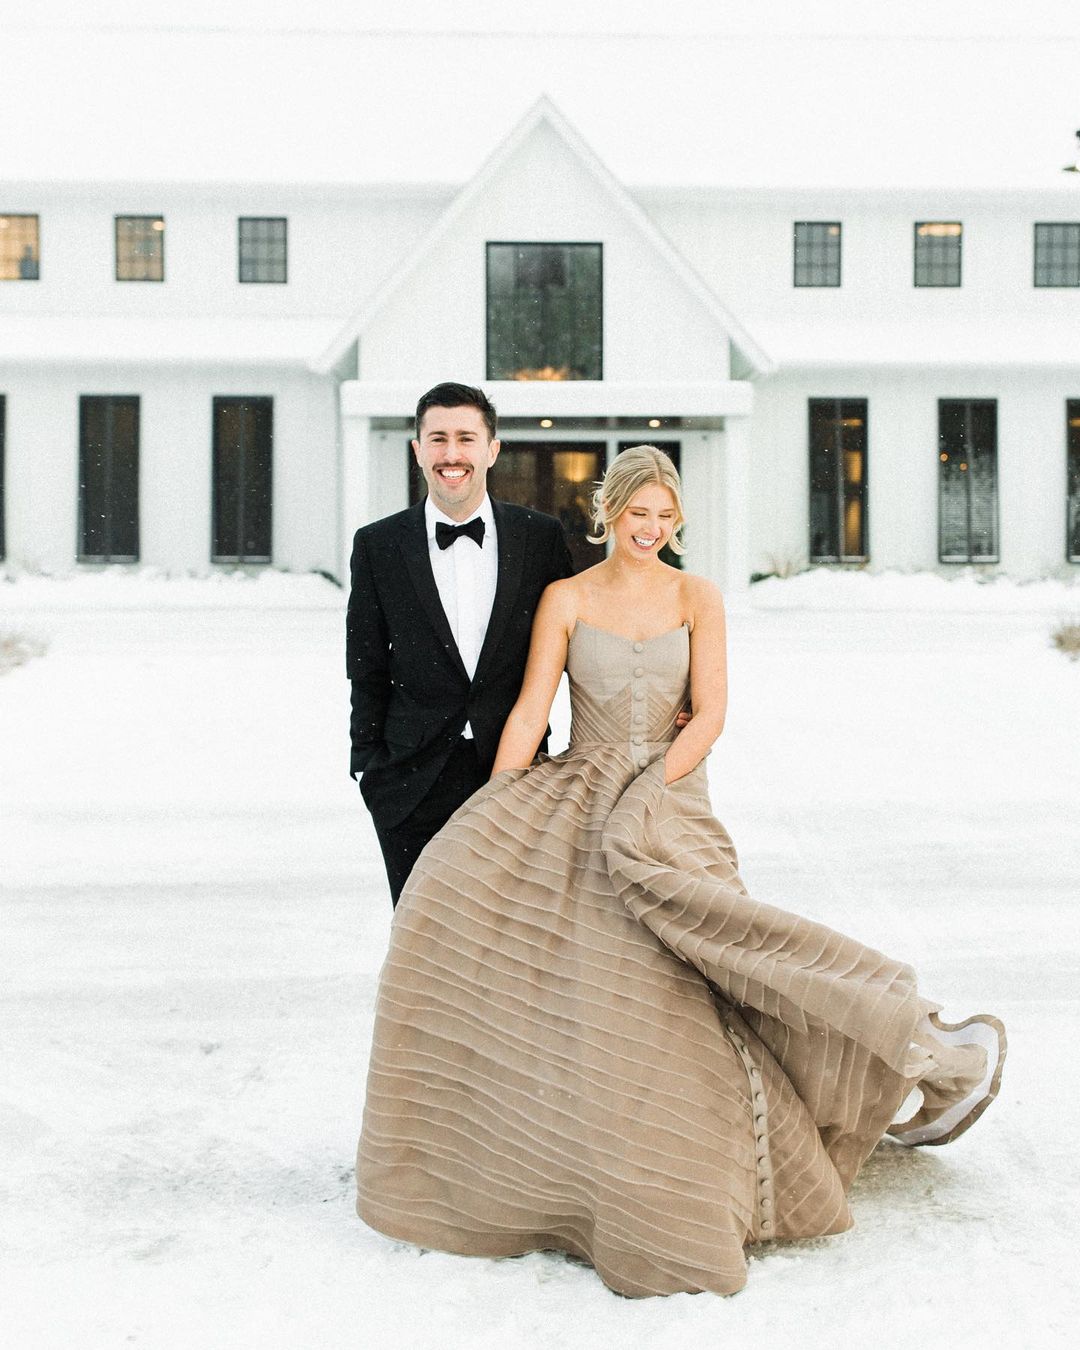 WINTER WEDDING OUTFIT IDEAS, WHAT TO WEAR FOR WINTER WEDDINGS